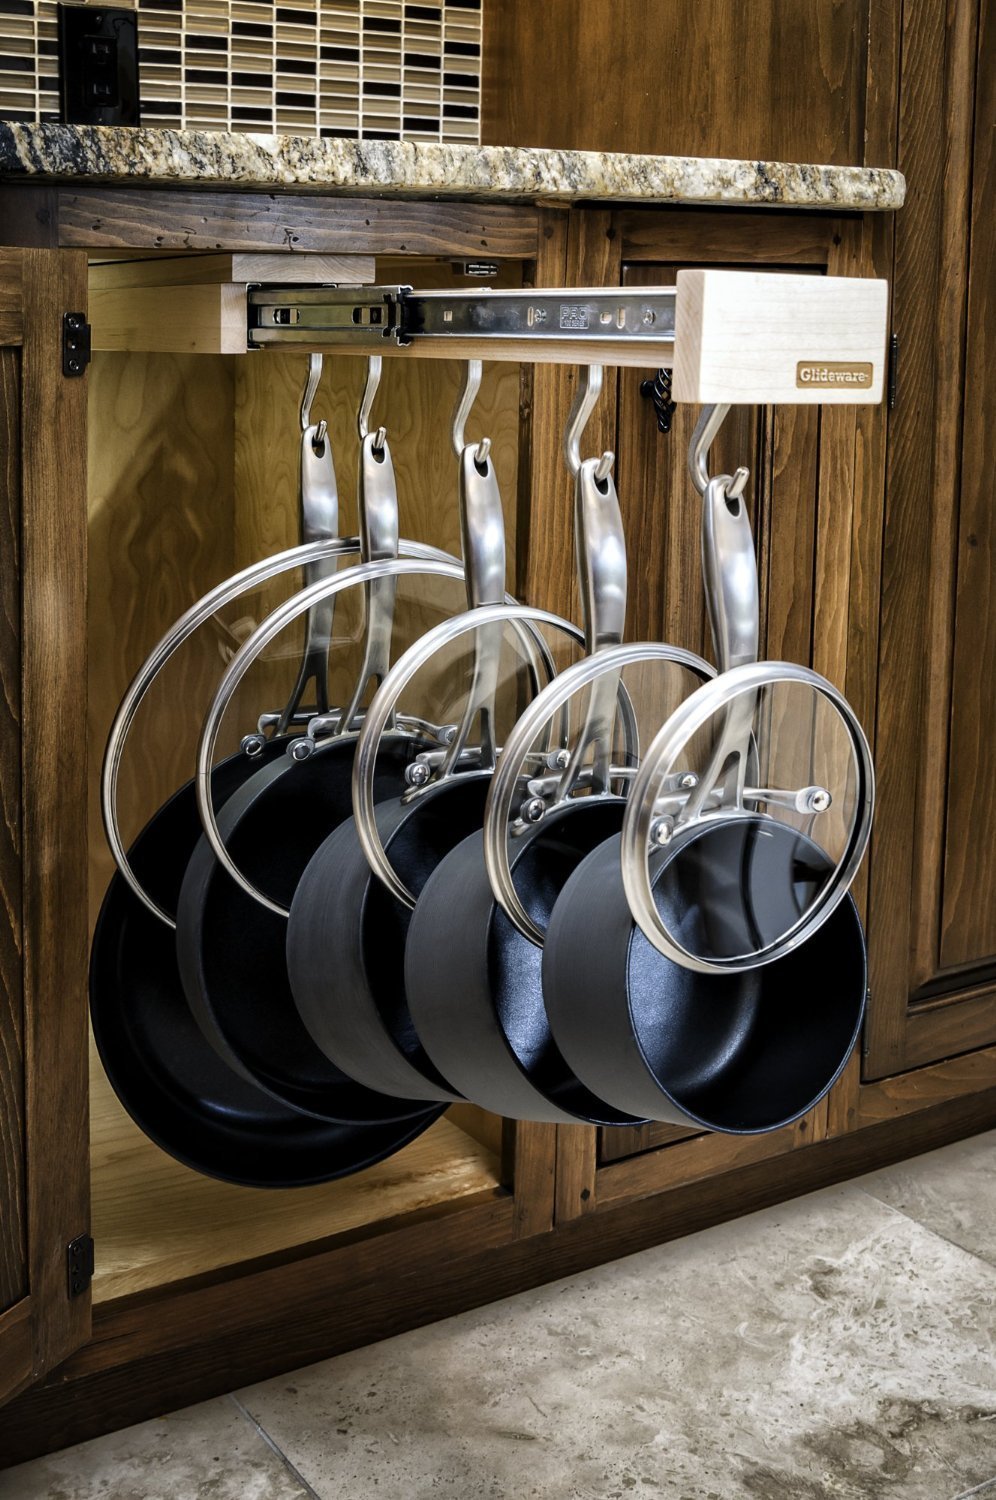 https://www.home-storage-solutions-101.com/images/organizing-pots-and-pans-pull-out-hanging-organizer-amazon-original.jpg